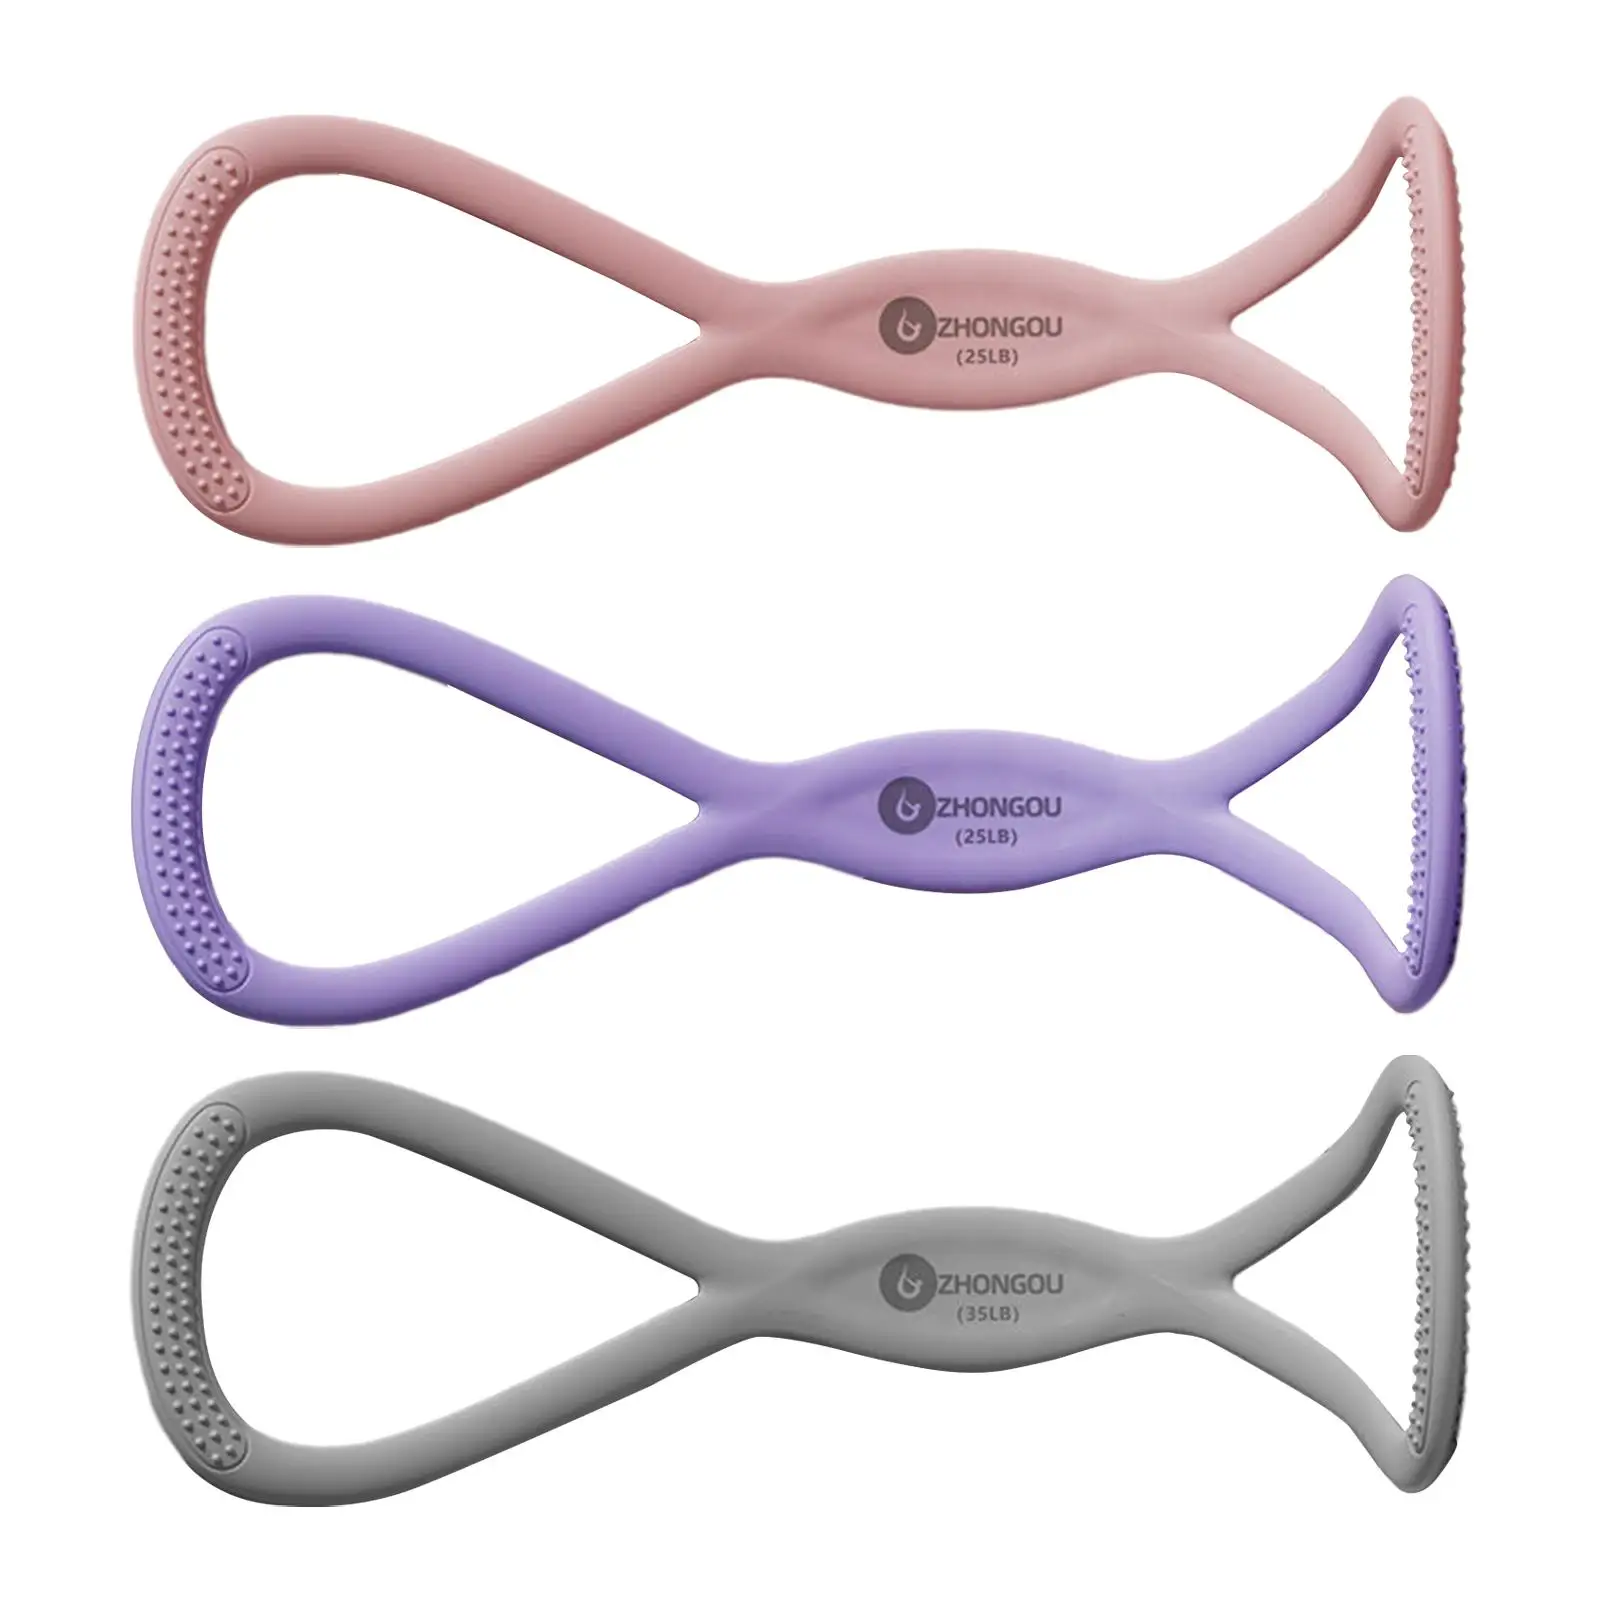 8 Shaped Resistance Band Yoga Exercise Band for Trainer Stretching Home Gym